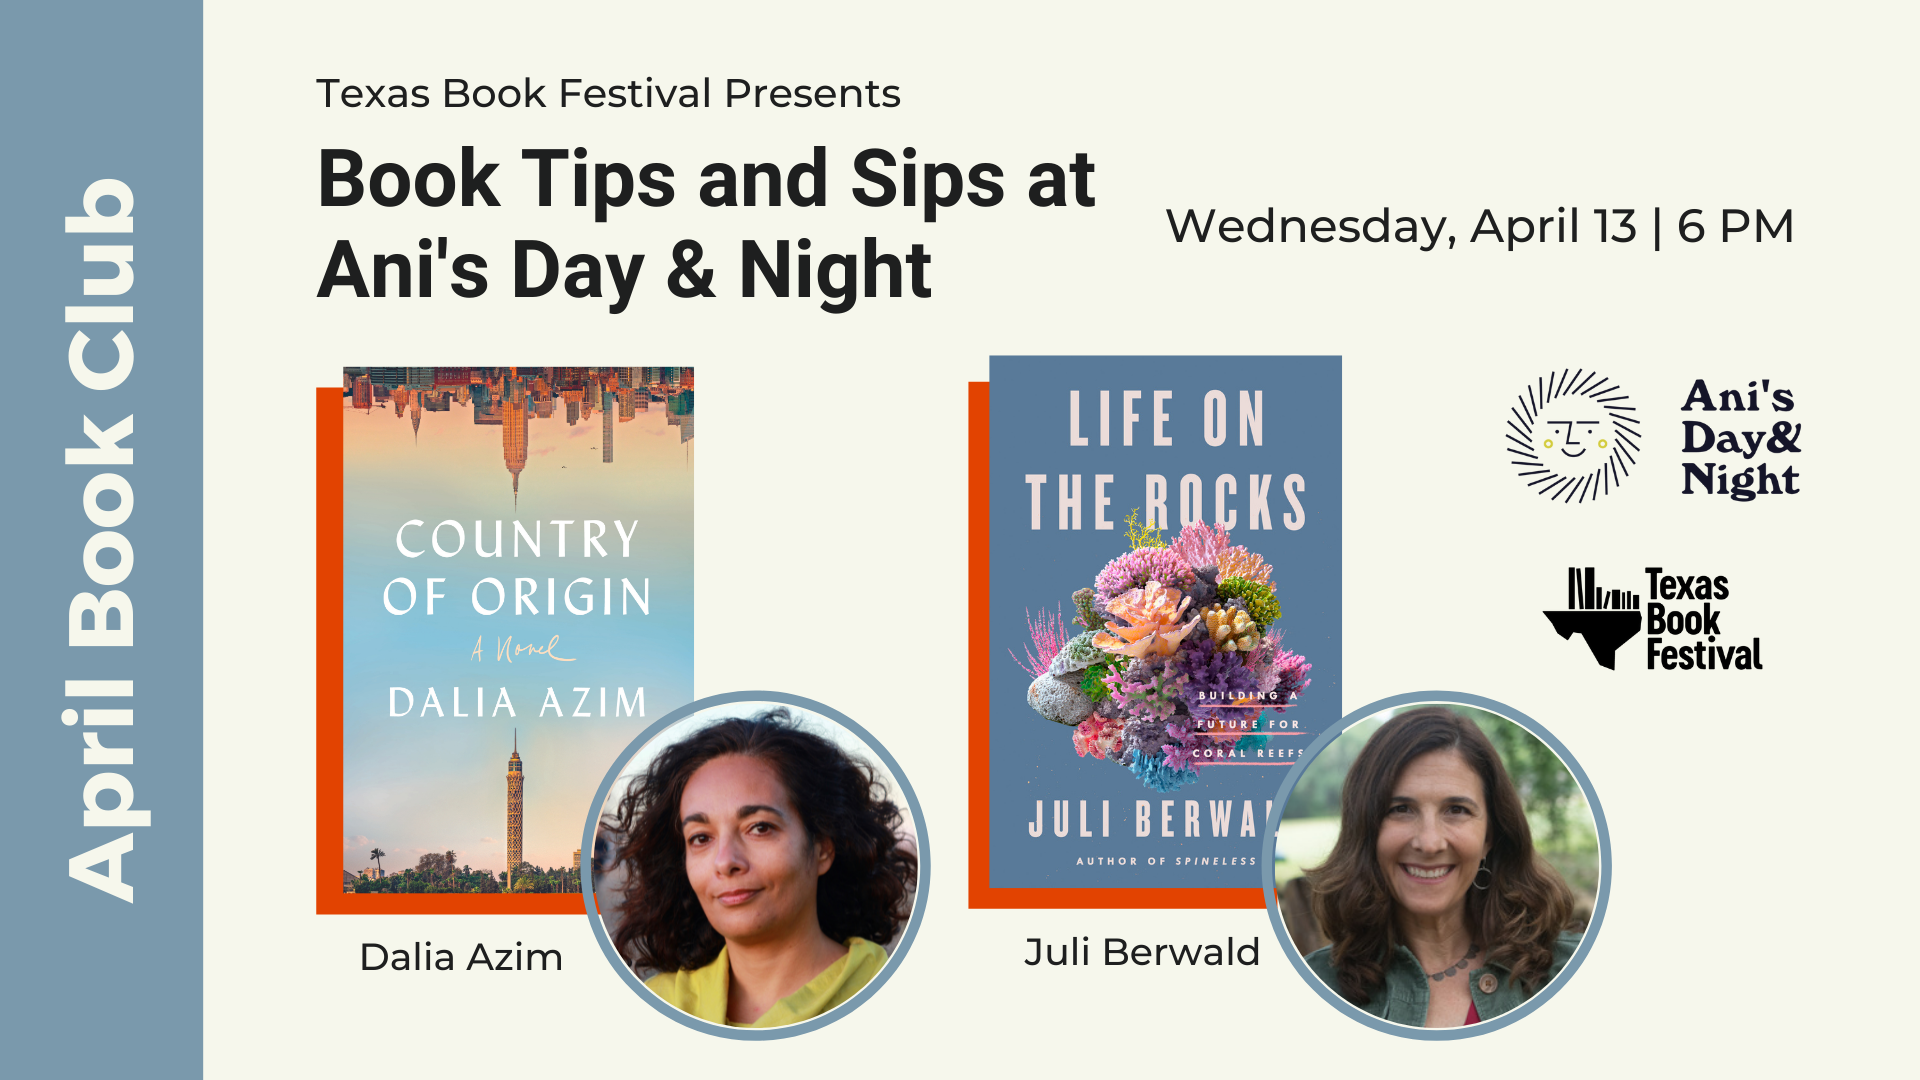 Book Tips and Sips at Ani’s Day & Night